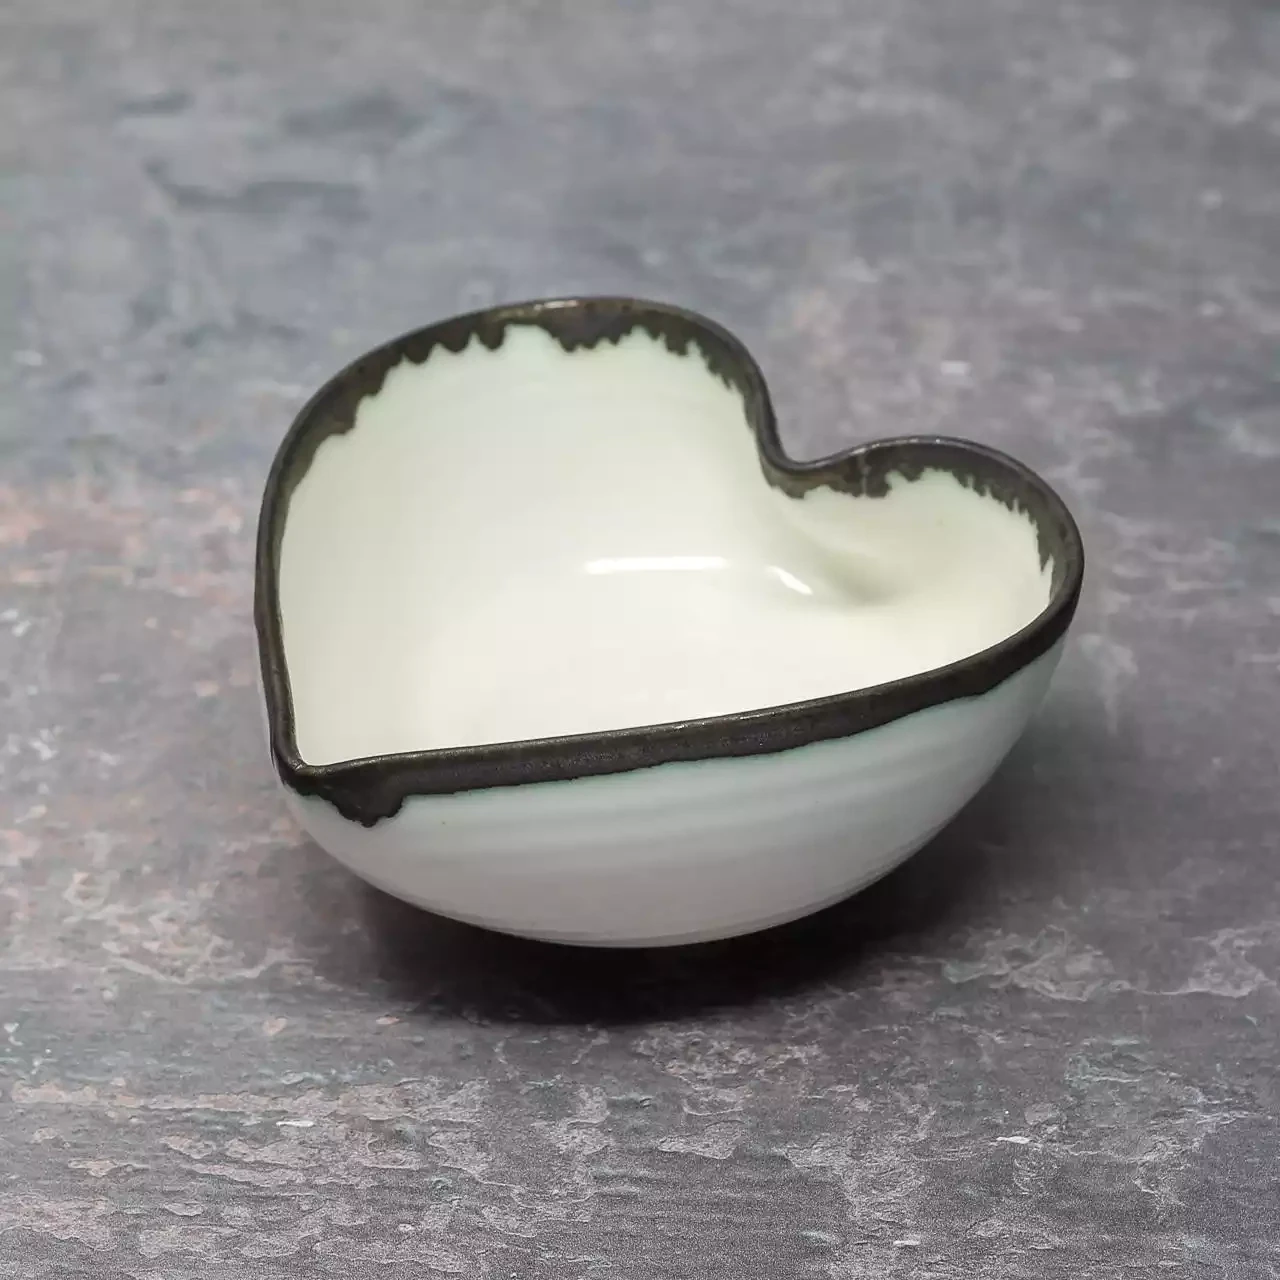 Porcelain Heart Bowl - Small - Cream With Blackened Rim by Mary Howard-George